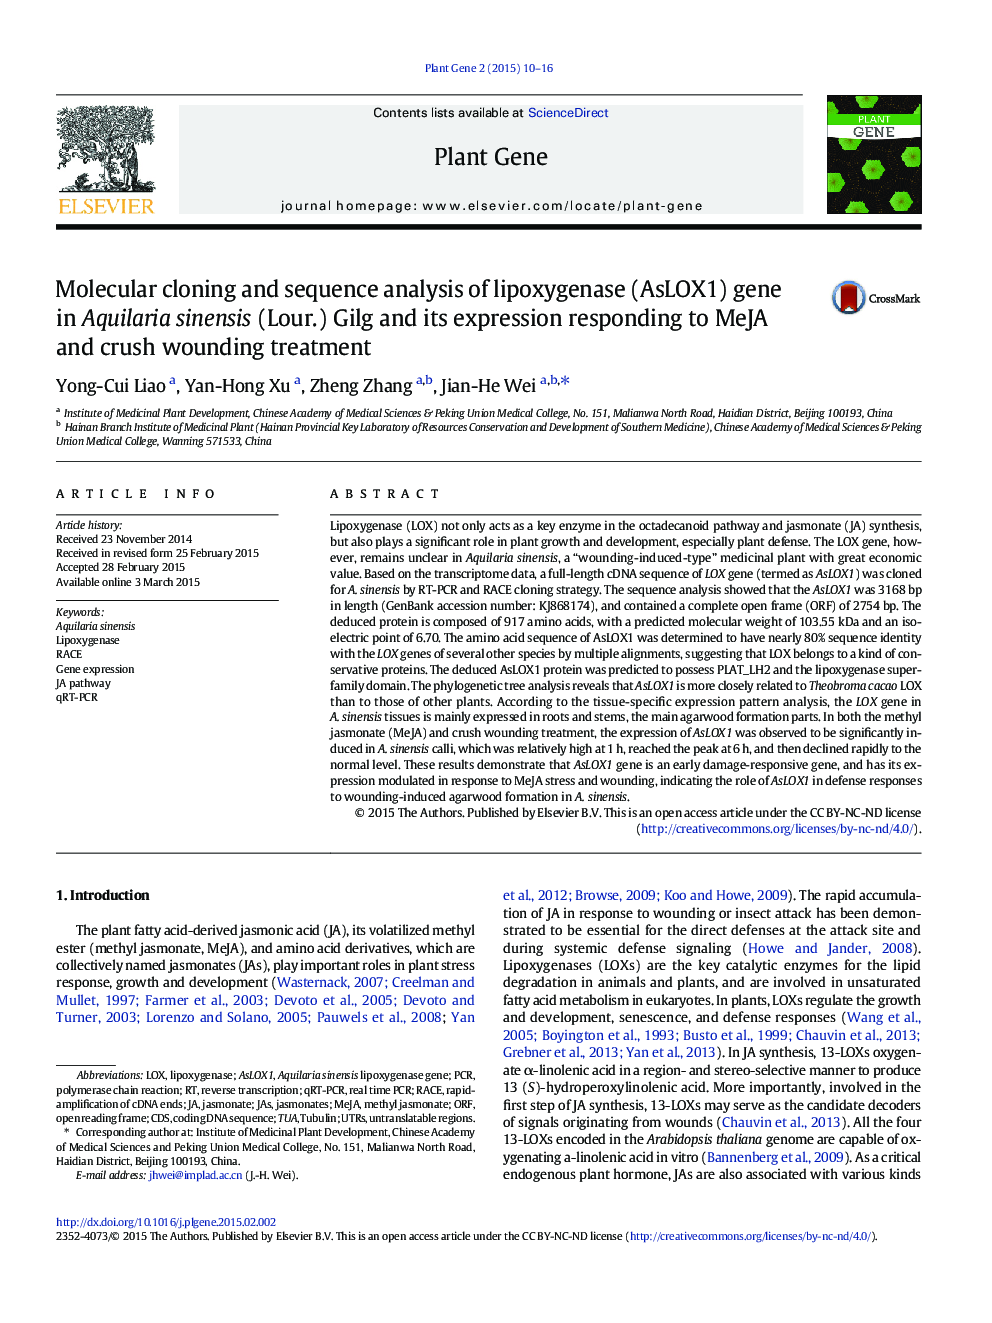 Molecular cloning and sequence analysis of lipoxygenase (AsLOX1) gene in Aquilaria sinensis (Lour.) Gilg and its expression responding to MeJA and crush wounding treatment